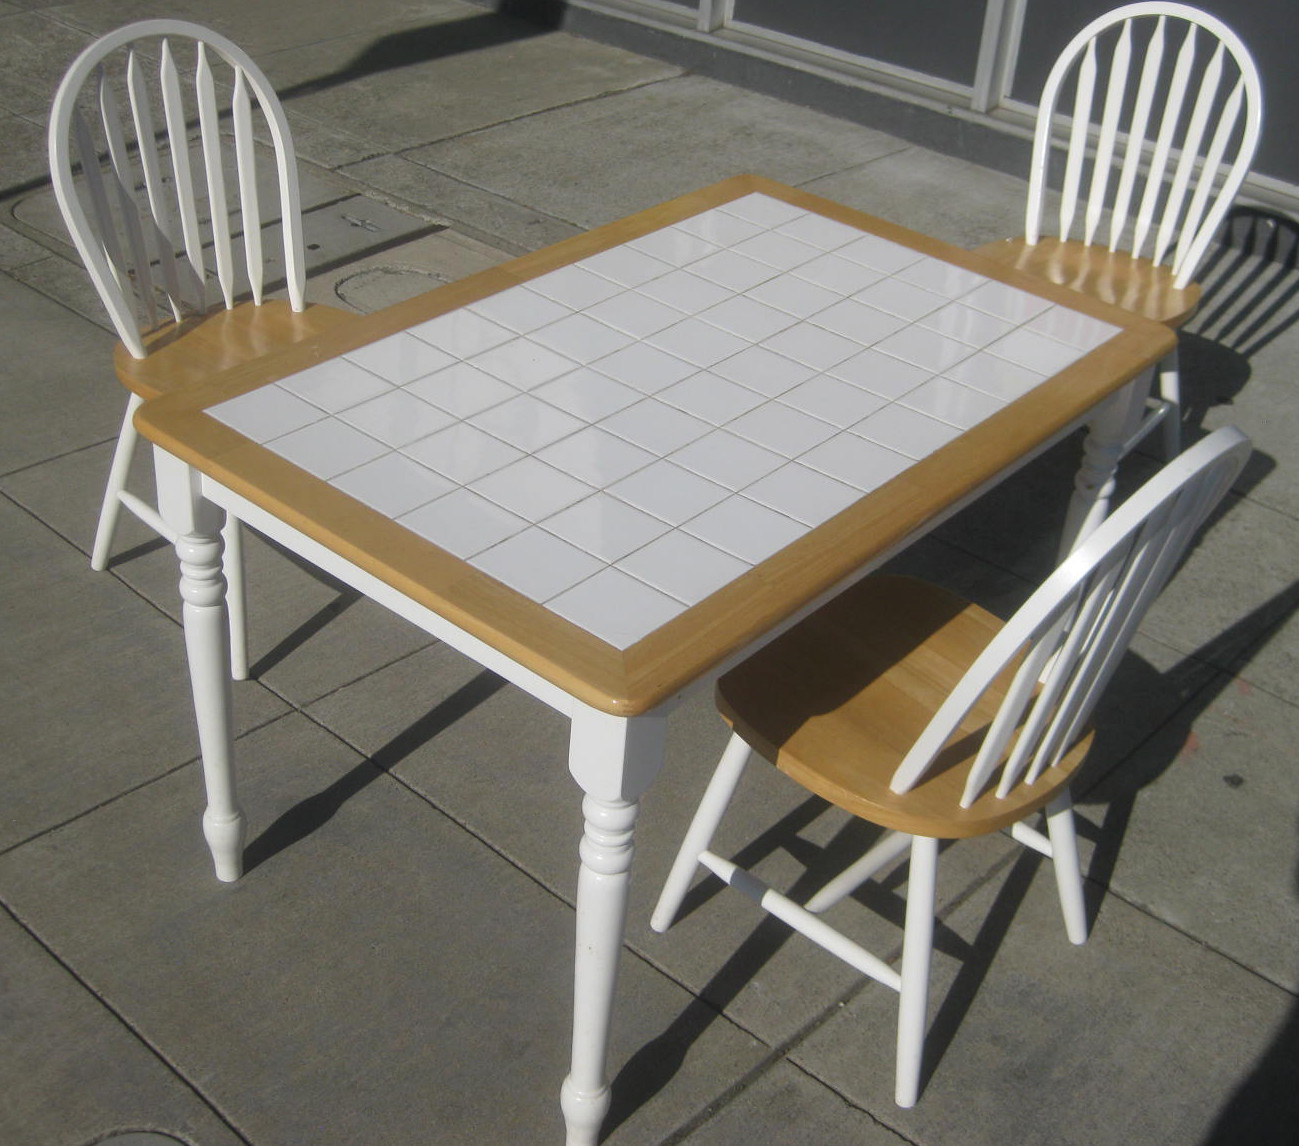 Ceramic Tile Kitchen Tables
 UHURU FURNITURE & COLLECTIBLES SOLD Tile Top Table and